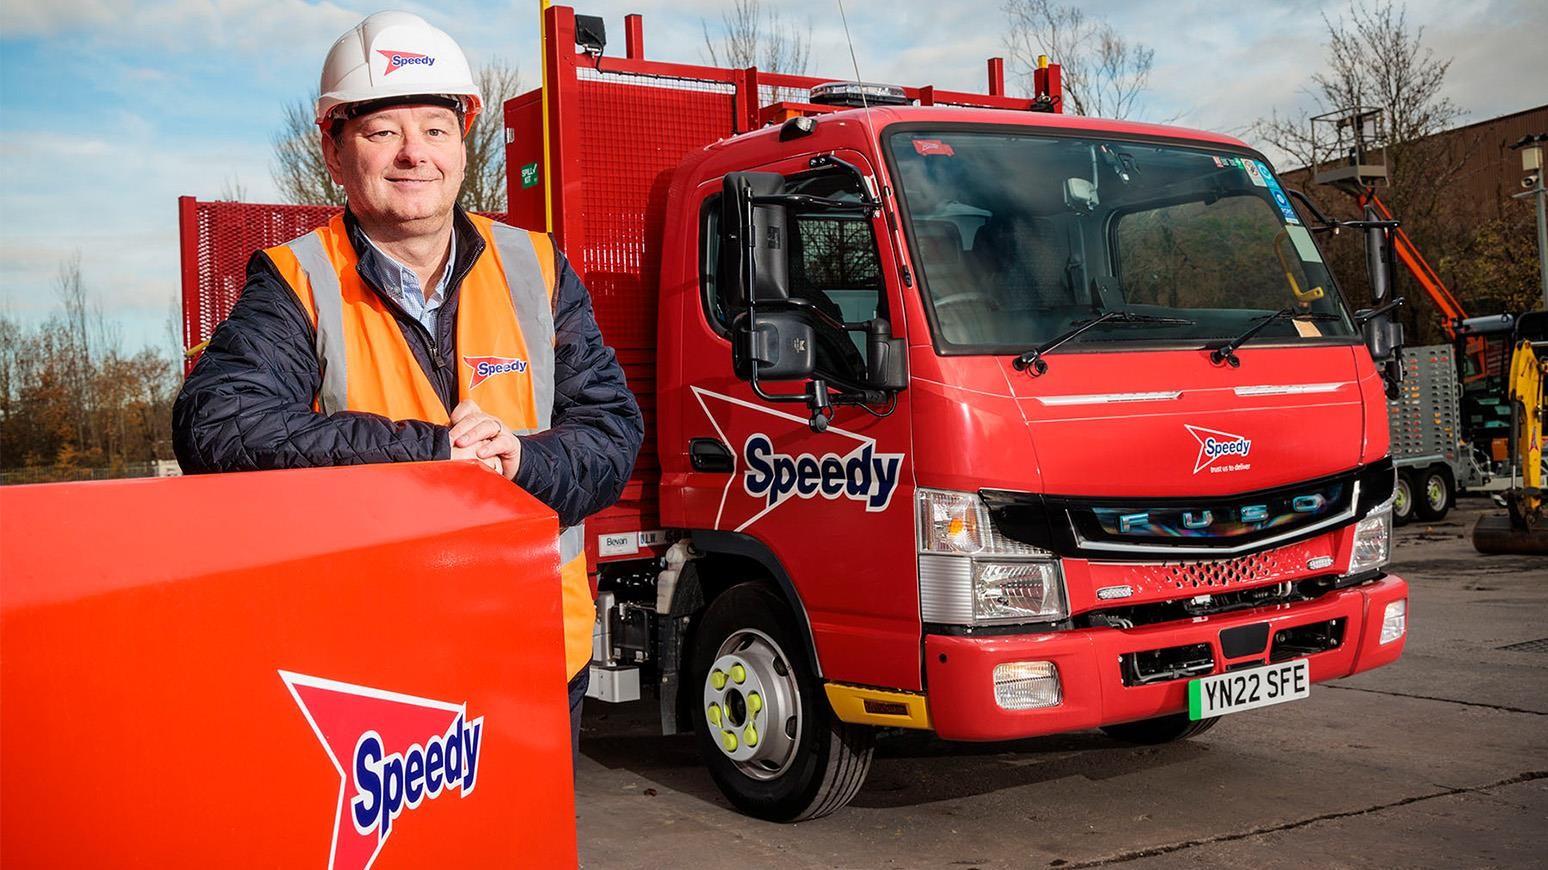 2 New Fuso eCanter Trucks Are First Full-Electric 7.5-Tonners For Speedy Services